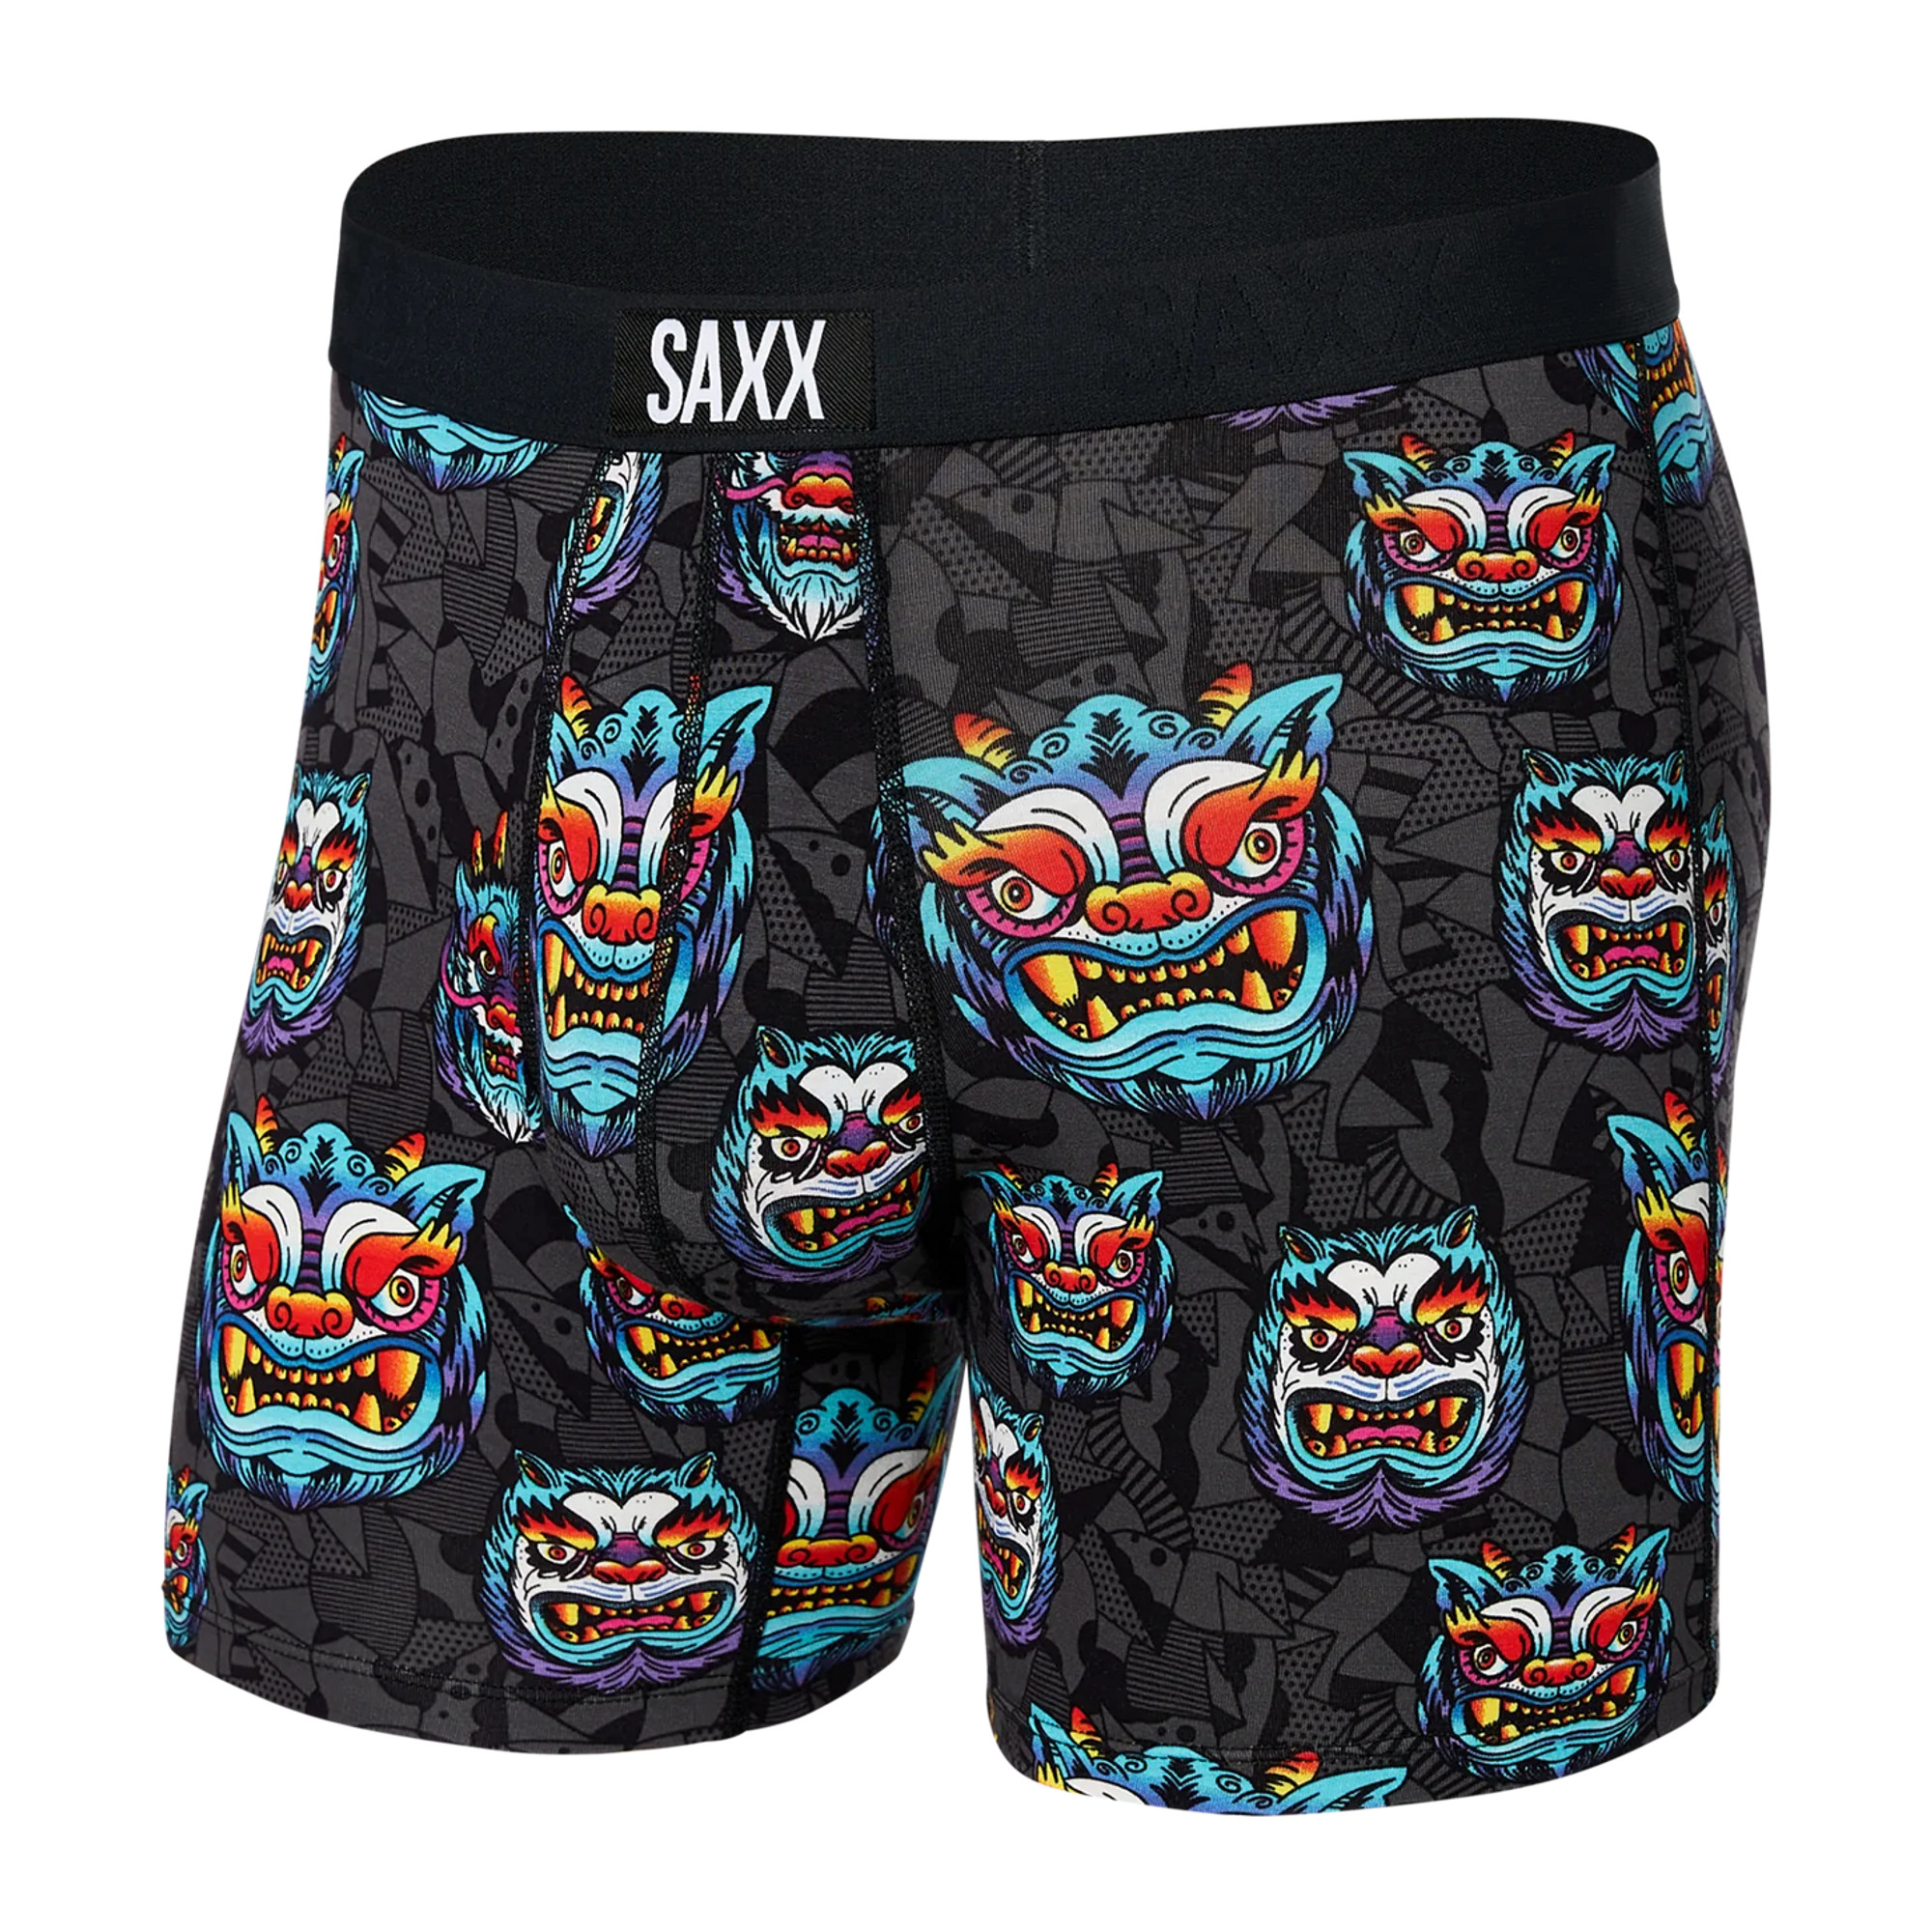 Saxx: Sale, Clearance & Outlet